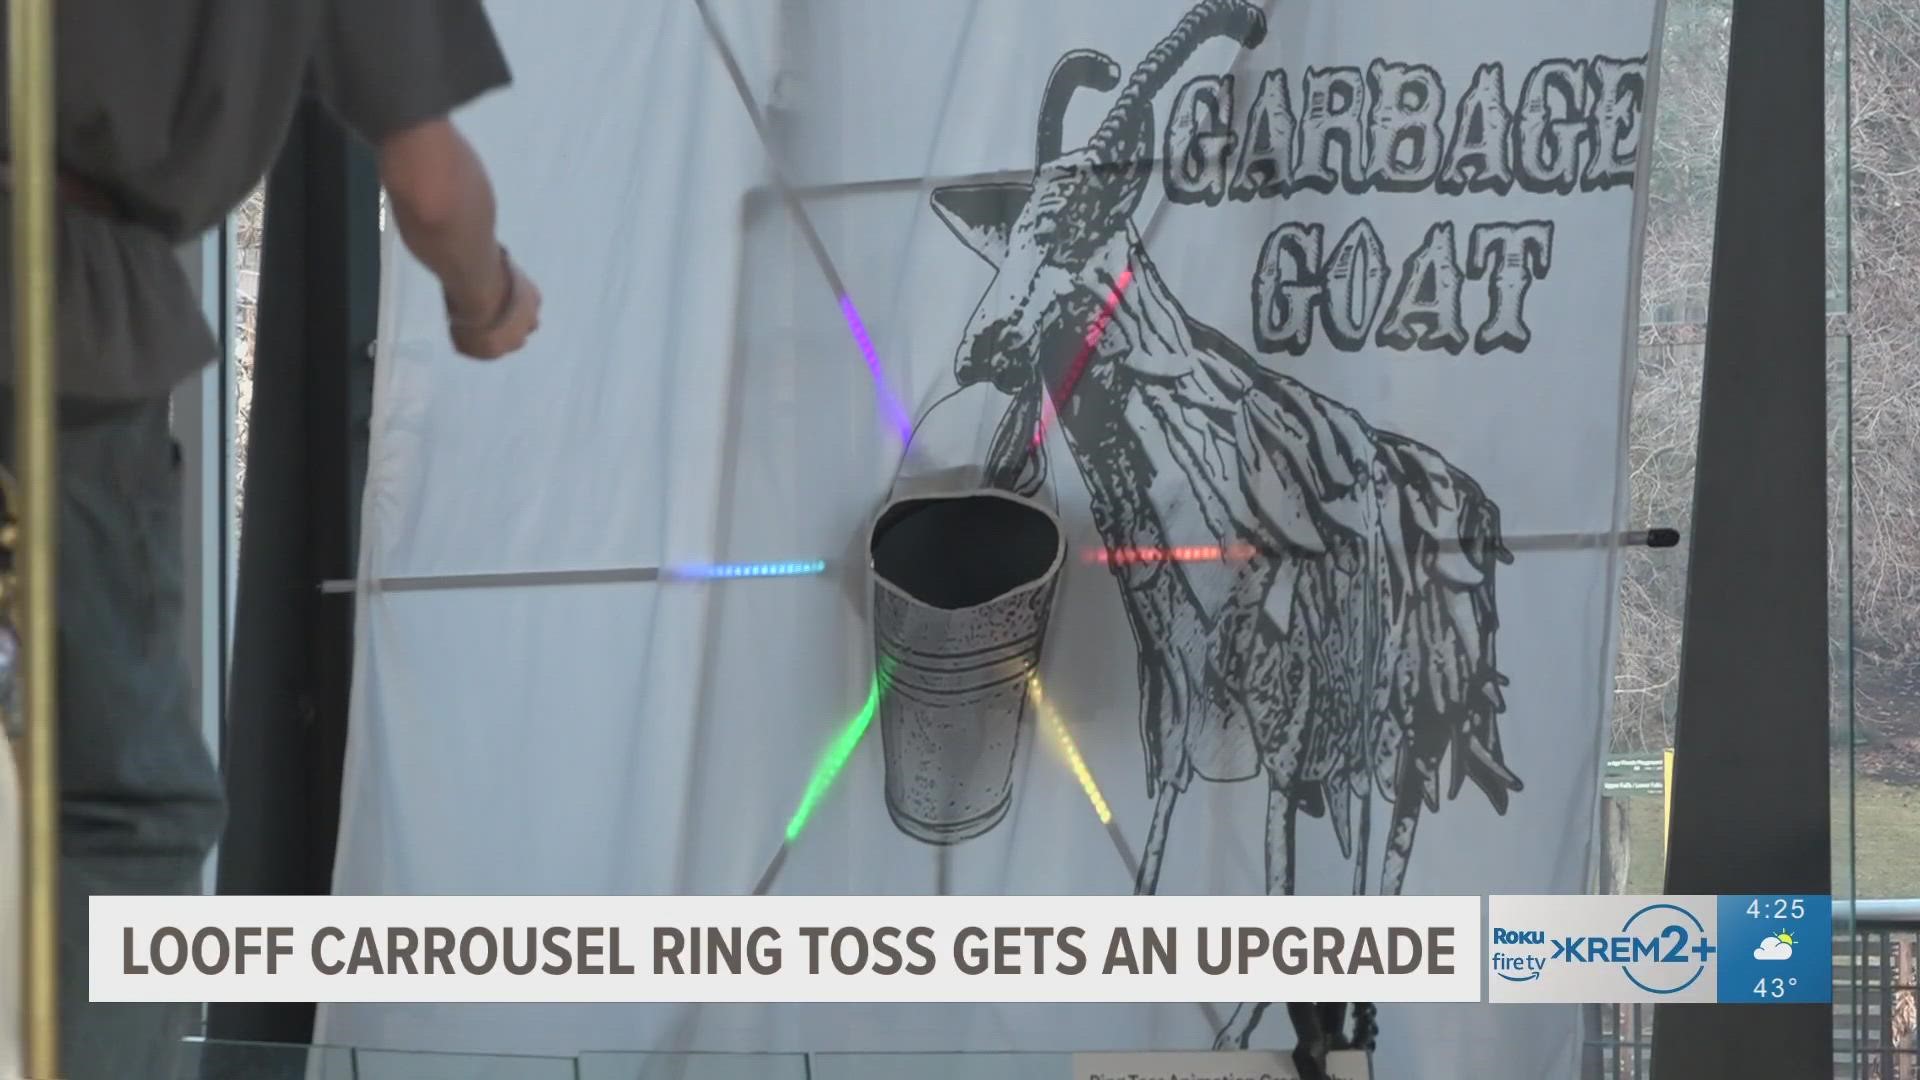 The new ring toss feature rewards carrousel riders with the most accurate throwing skills using a motion sensor that activates colorful lights.